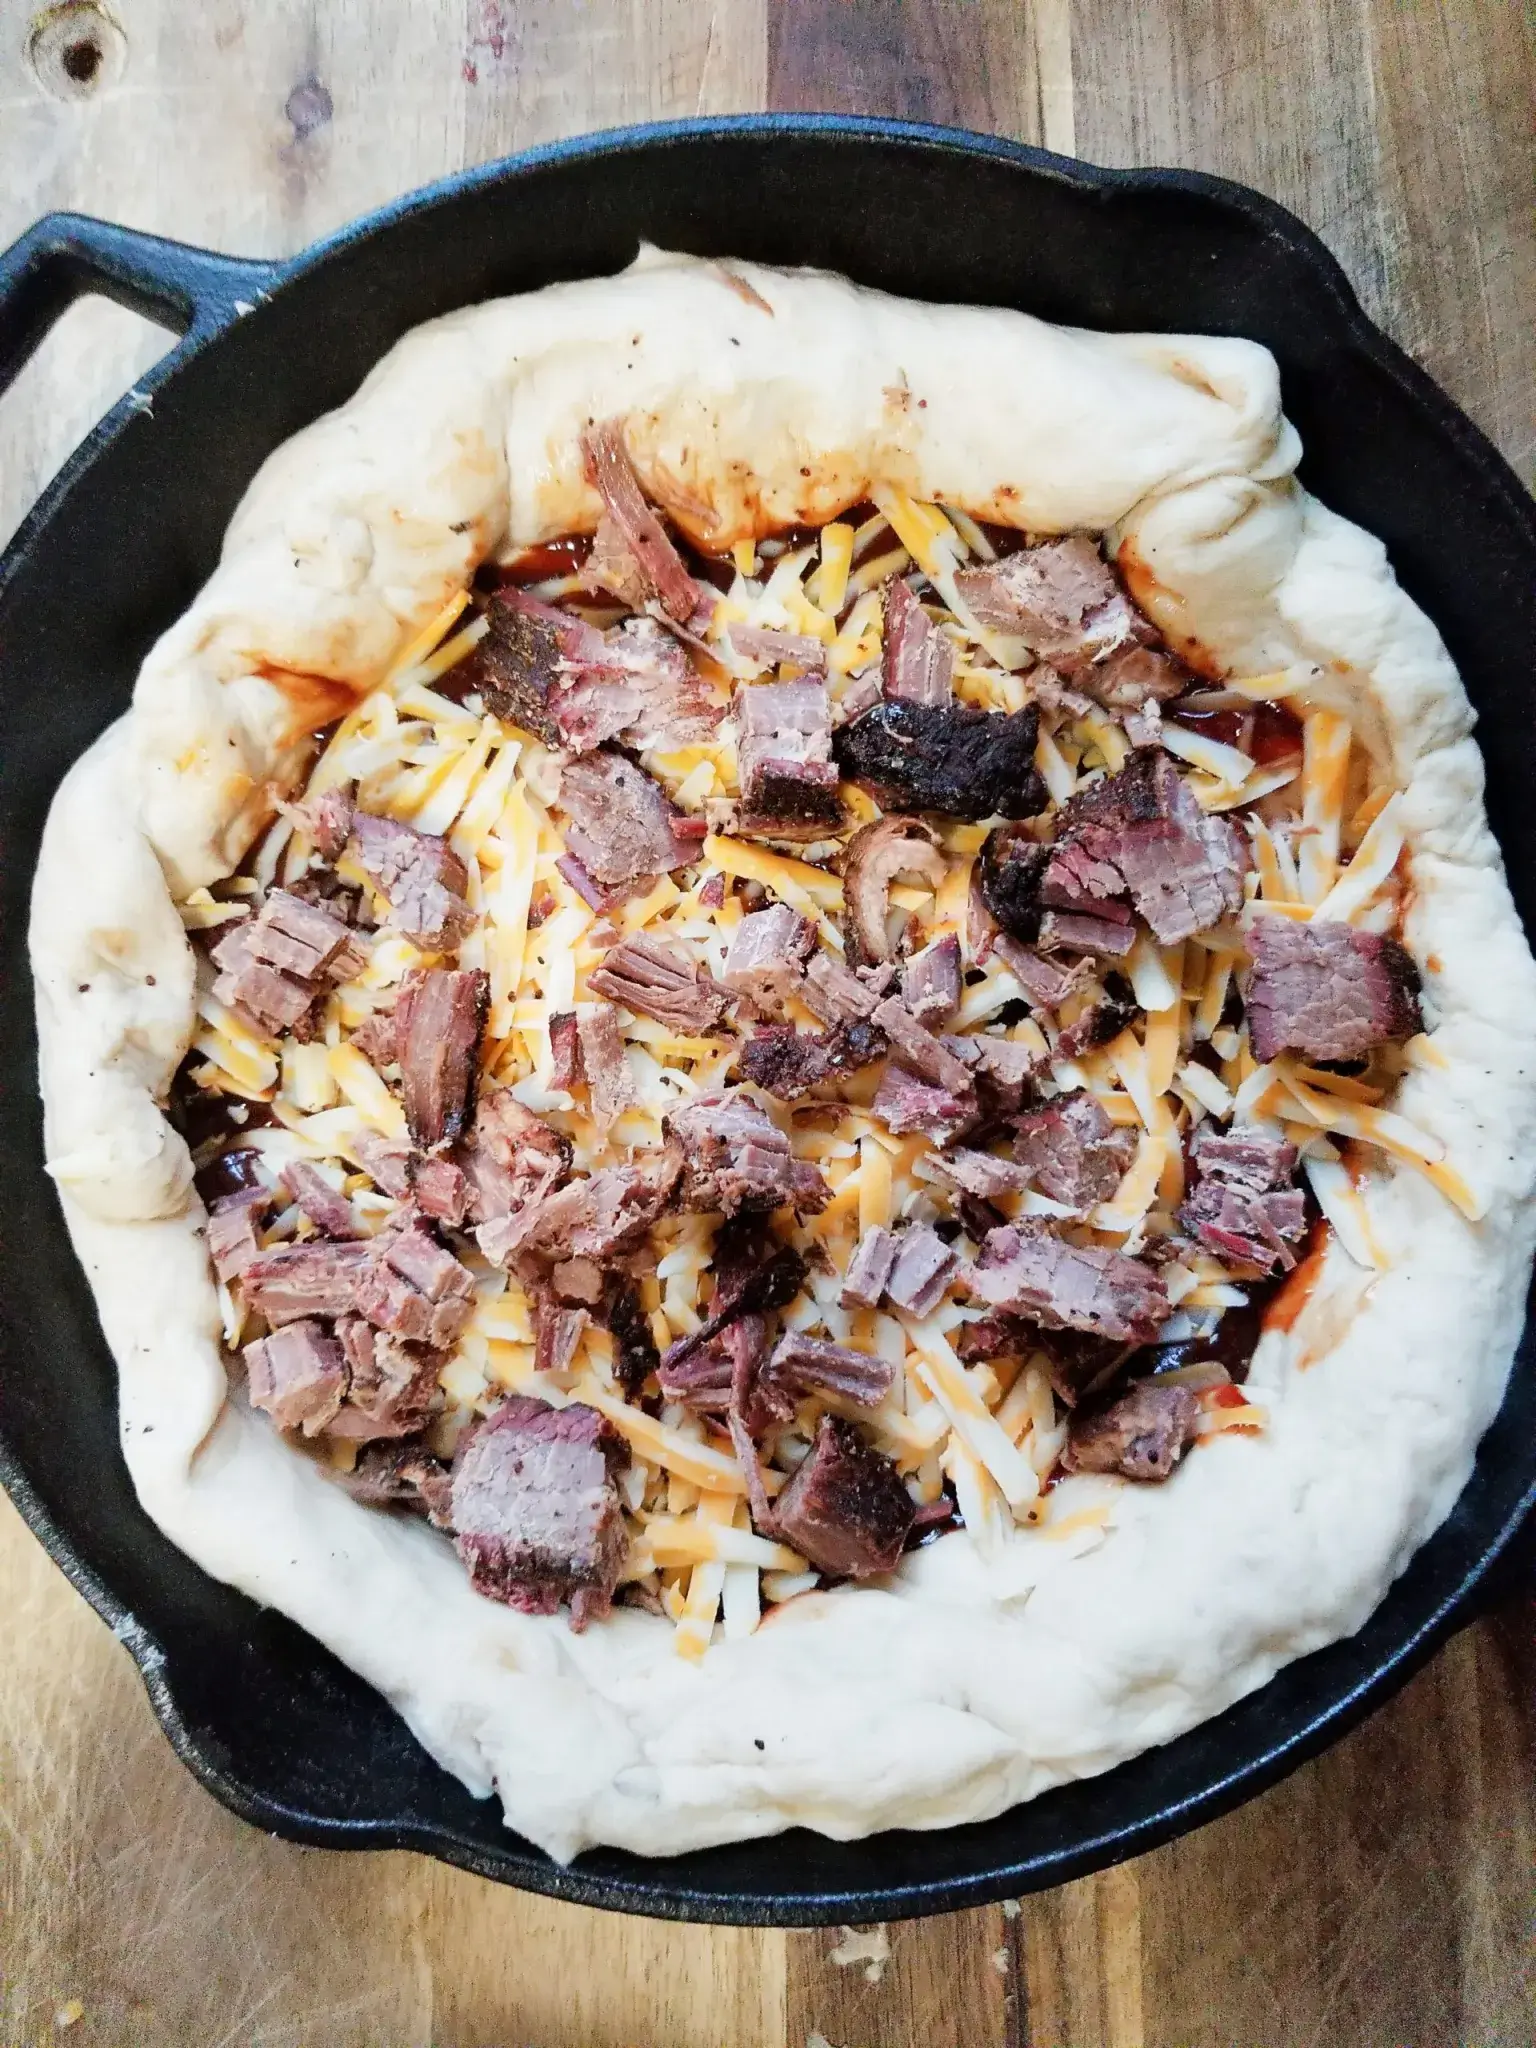 brisket, cheese and pizza dough on a cast iron skillet.